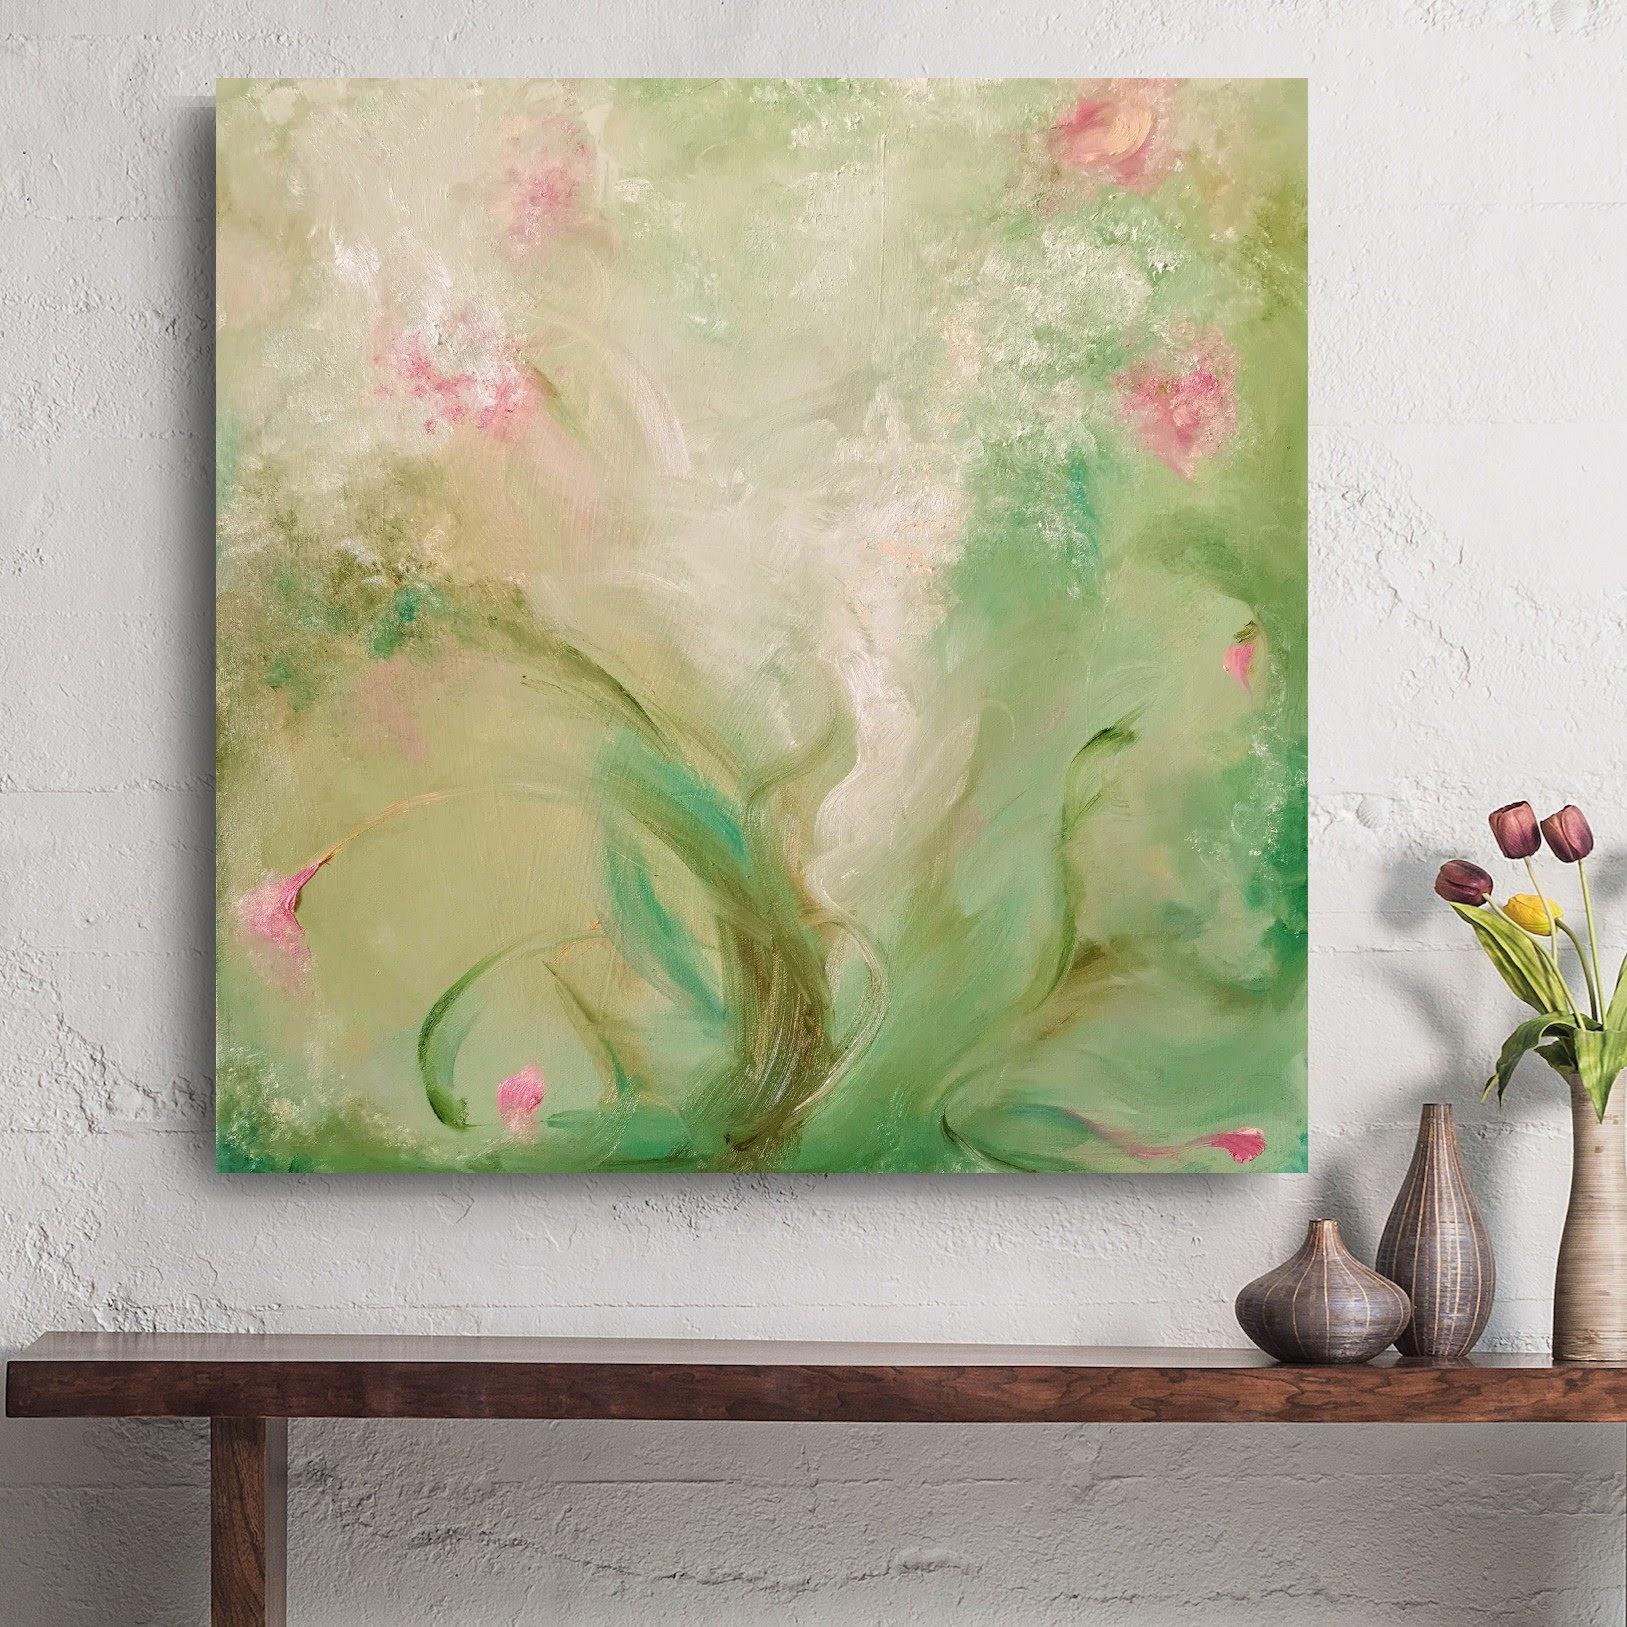 A most verdant spring - Whimsical green and pink abstract painting For Sale 5